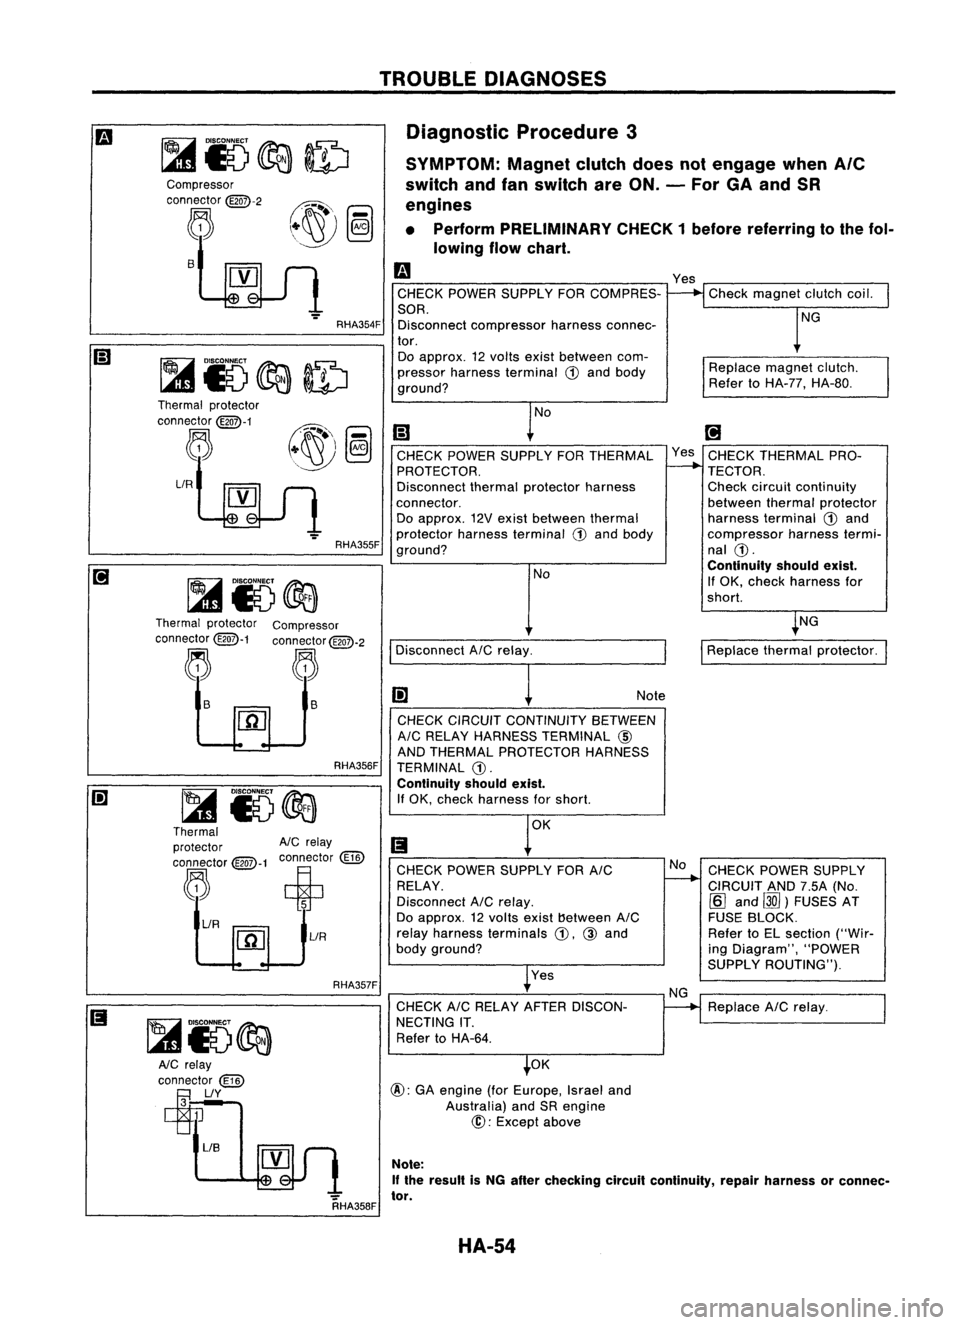 NISSAN ALMERA N15 1995  Service Manual TROUBLEDIAGNOSES
Diagnostic Procedure3
SYMPTOM: Magnetclutchdoesnotengage when
Ale

switch andfanswitch areON. -For GAand SR
engines
• Perform PRELIMINARY CHECK1before referring tothe fol-
lowing fl